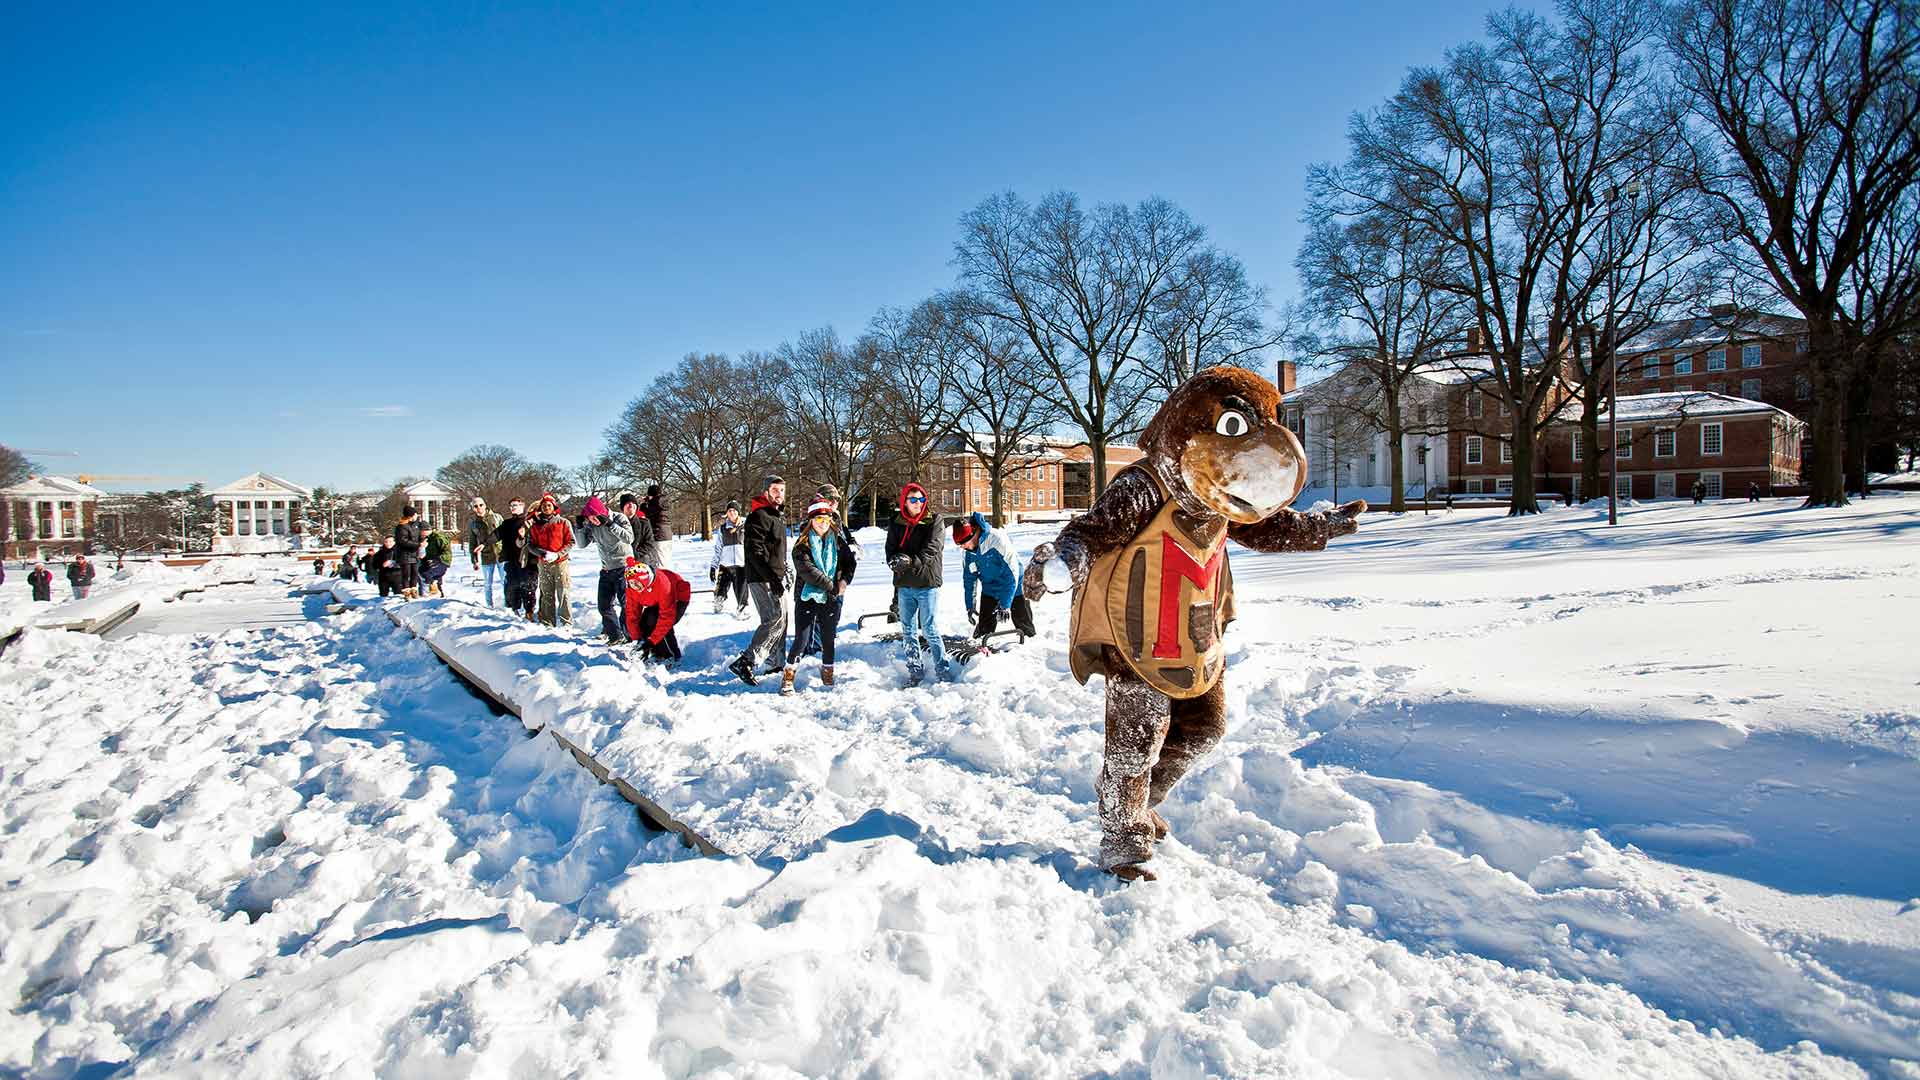 Testudo and students in the snow in 2016